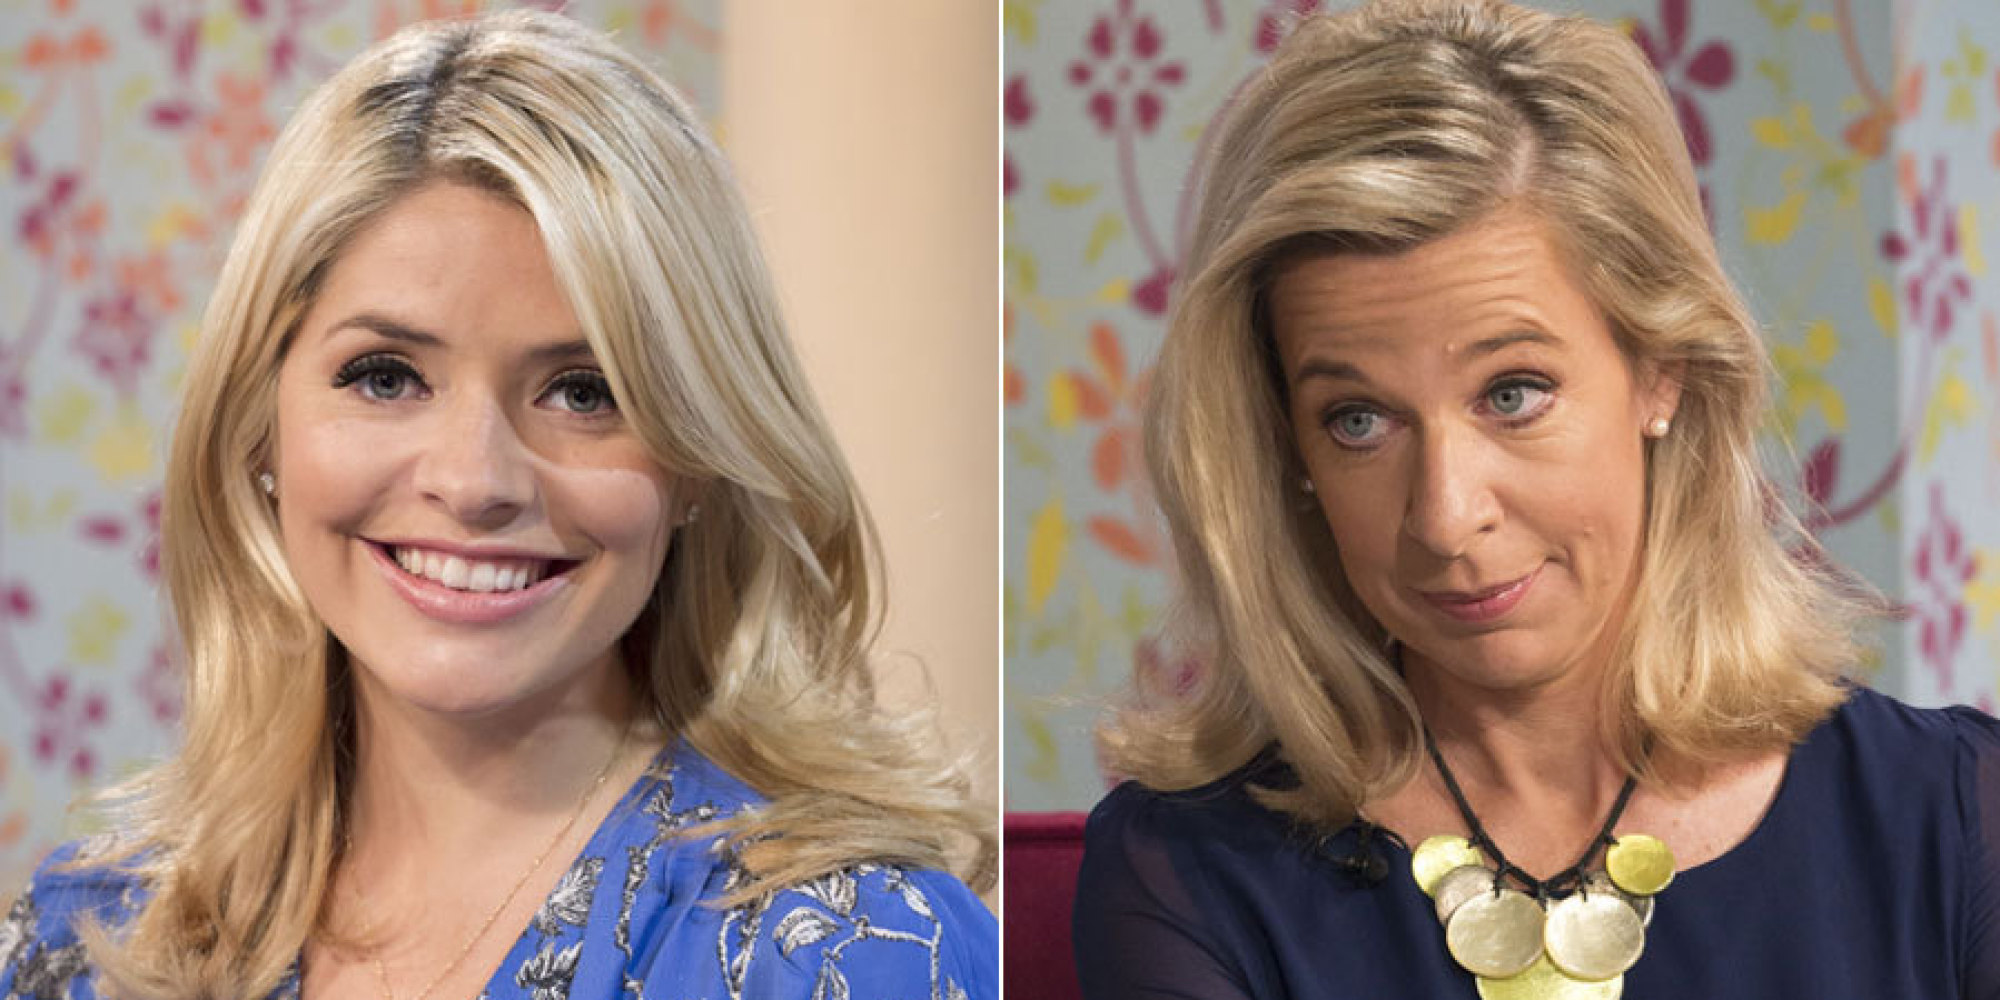 Holly Willoughby On Katie Hopkins: 'I Don't Know What Goes On In Her Head' | HuffPost UK2000 x 1000